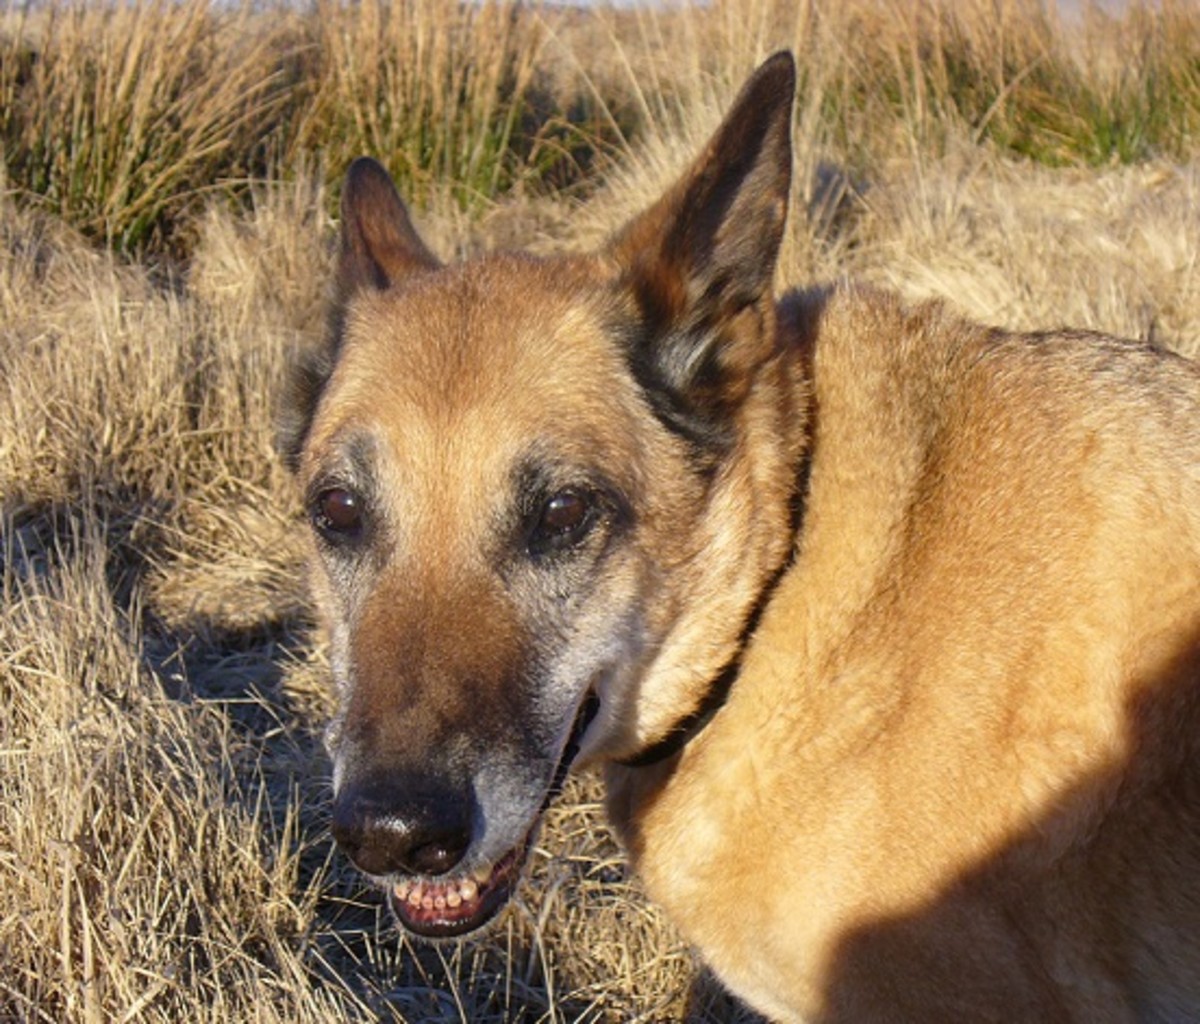 Nettle, a German Shepherd cross, whom I adopted from the RSPCA when he was six months old. We are still enjoying each other's company  over 15 years later.